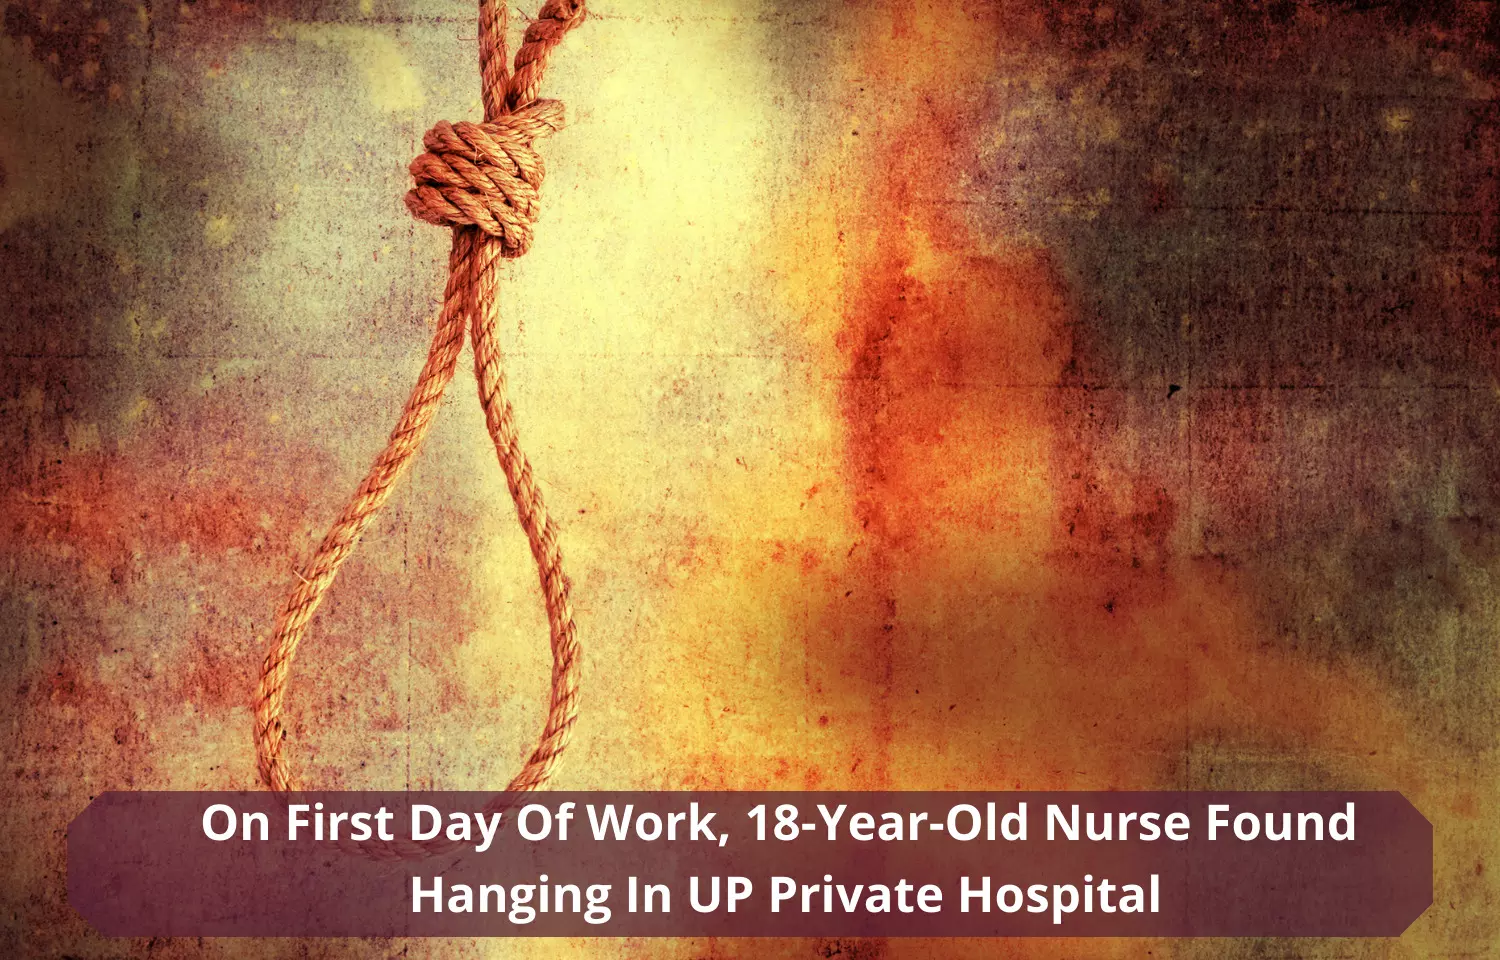 UP: 18-year-old nurse found hanging in private hospital